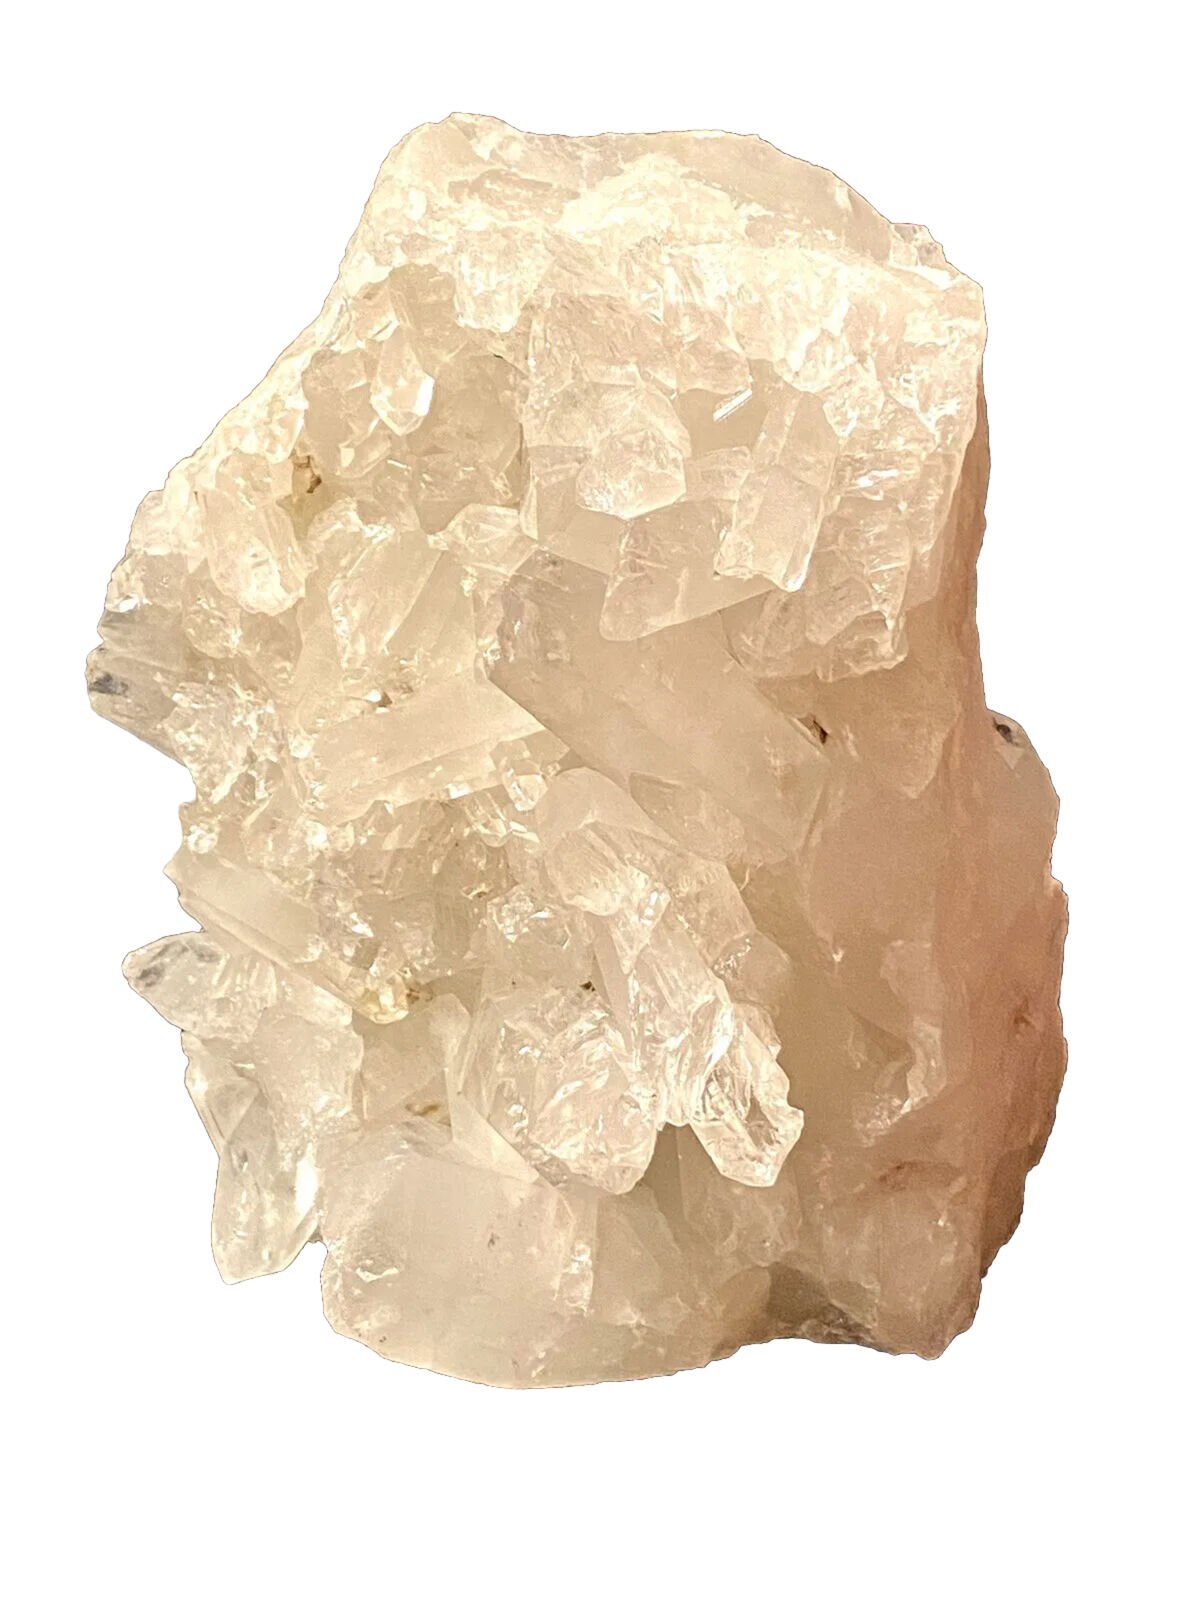 Natural 7 Pound Quartz Crystal Cluster With Mounting Hole 8x7x5 Inch Specimen